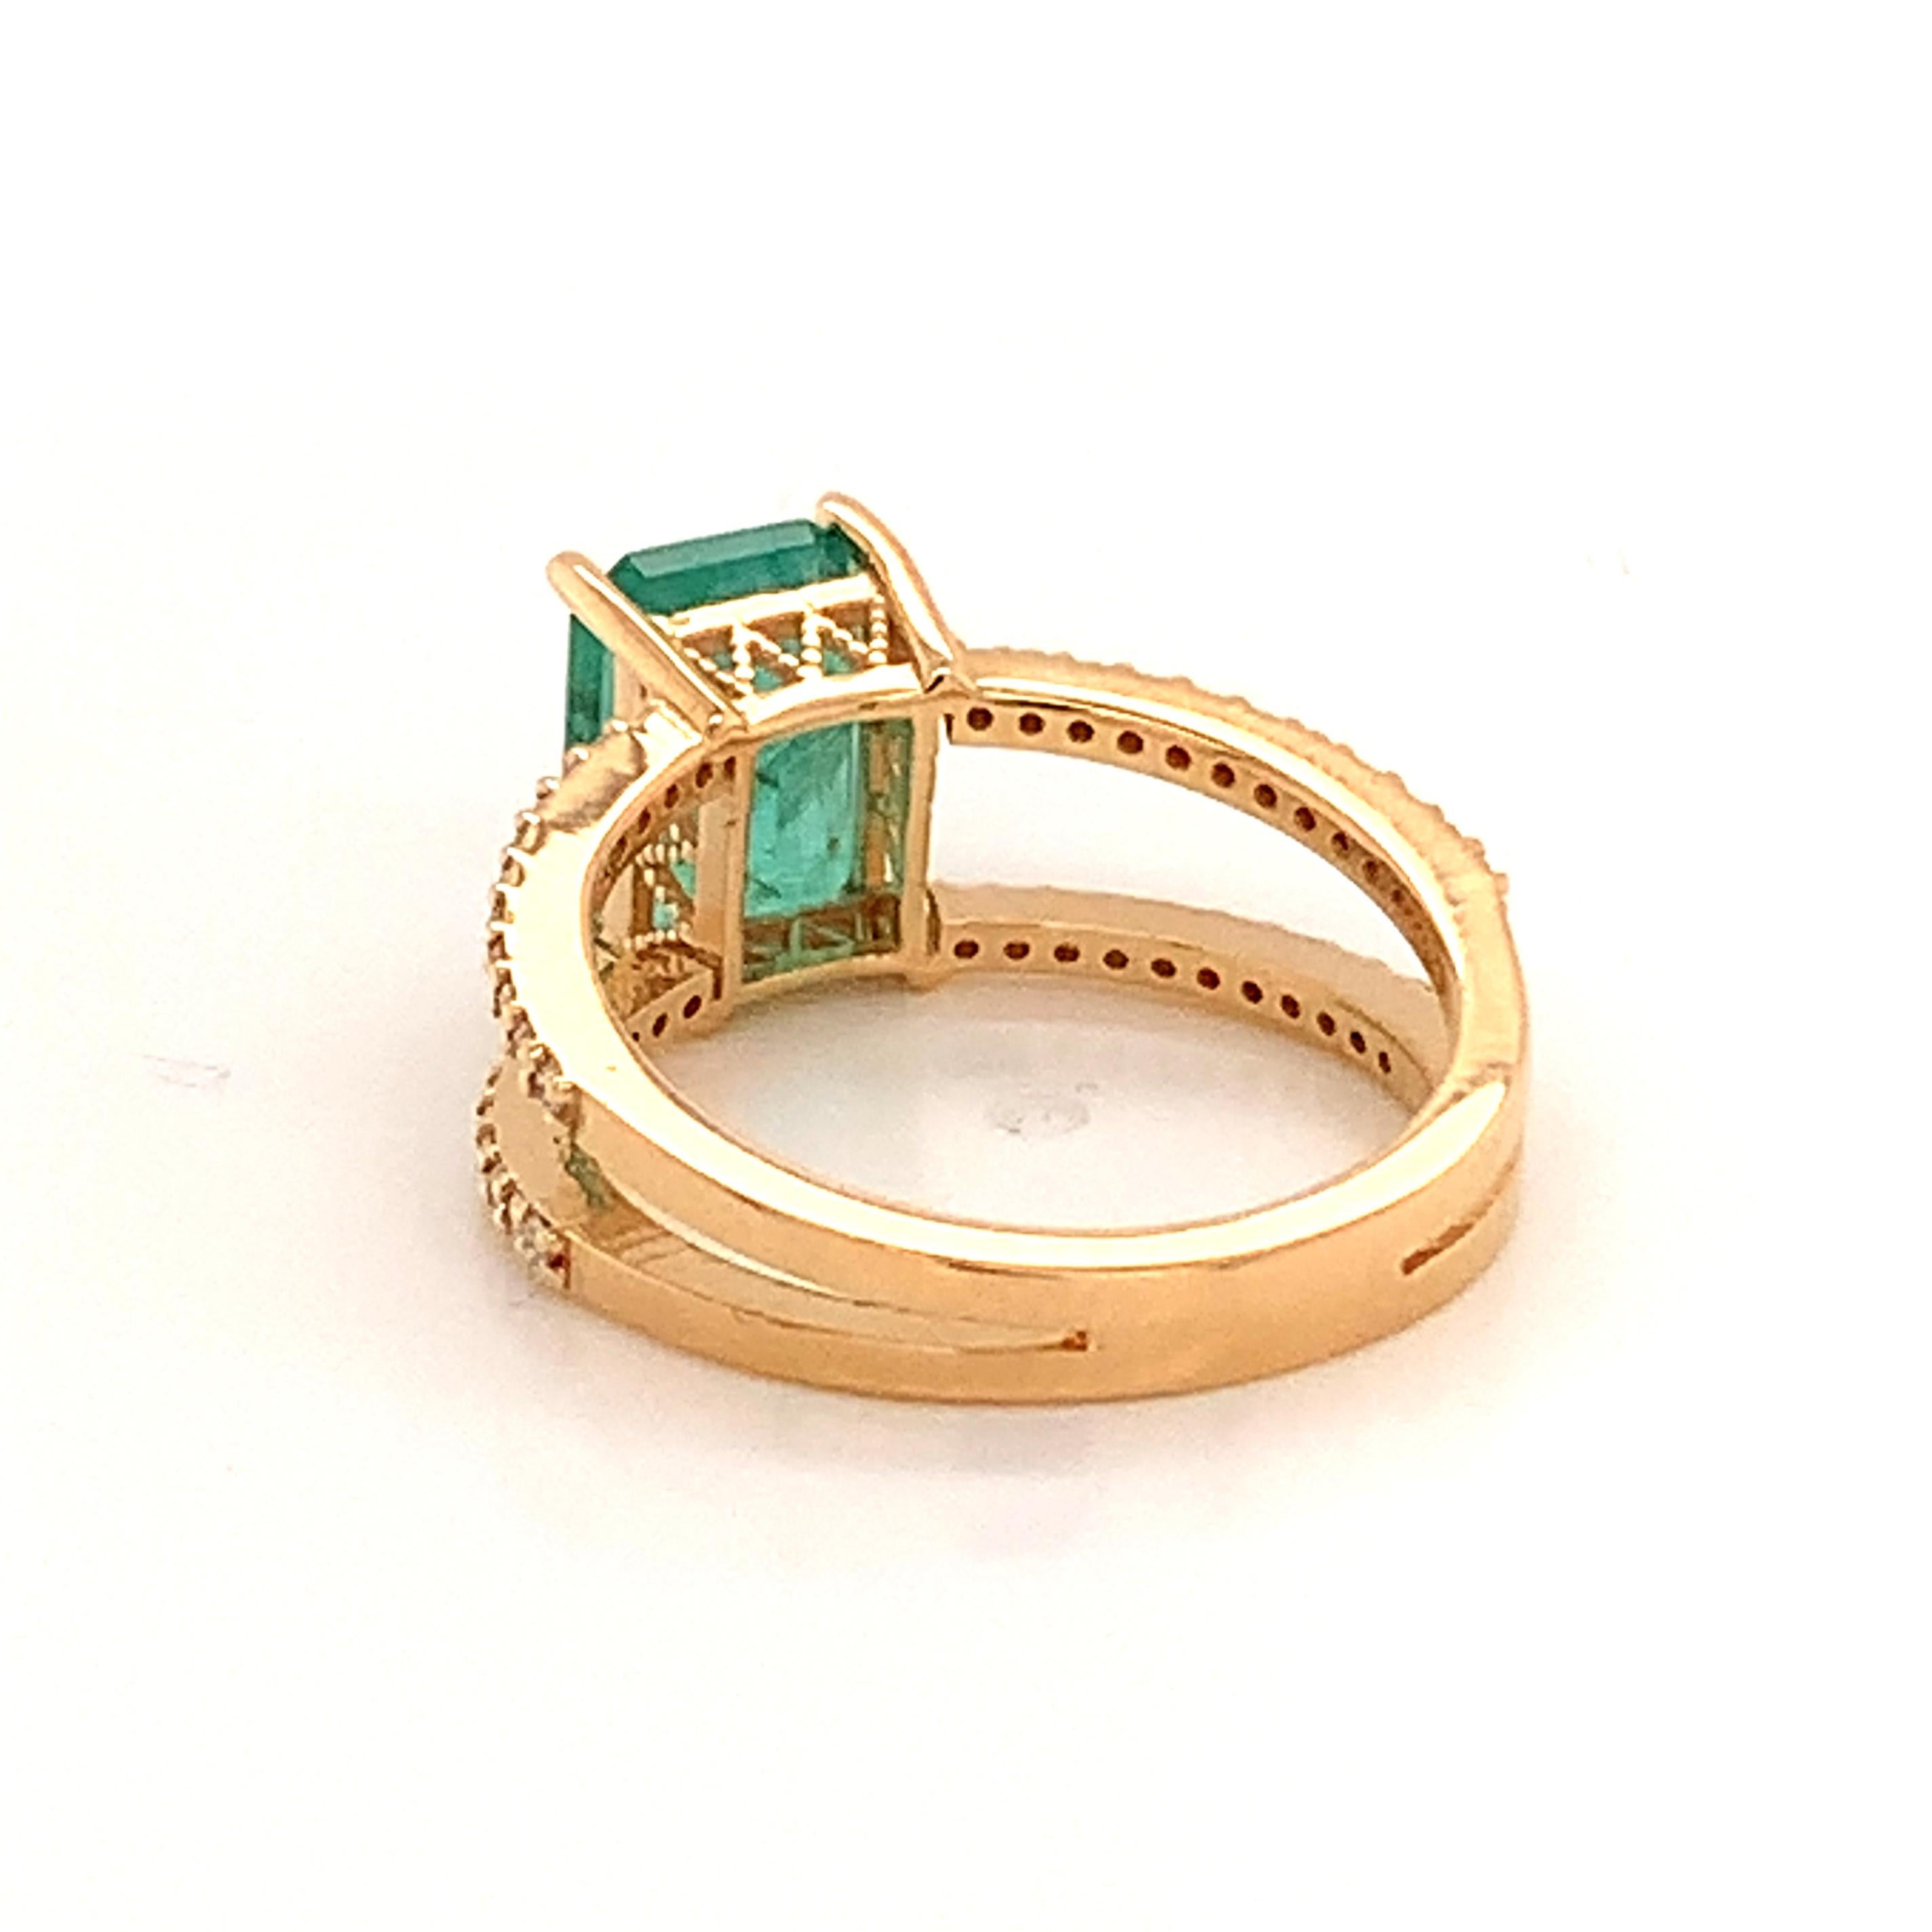 Natural Emerald Diamond Ring 14k Gold 2.32 TCW Certified For Sale 5